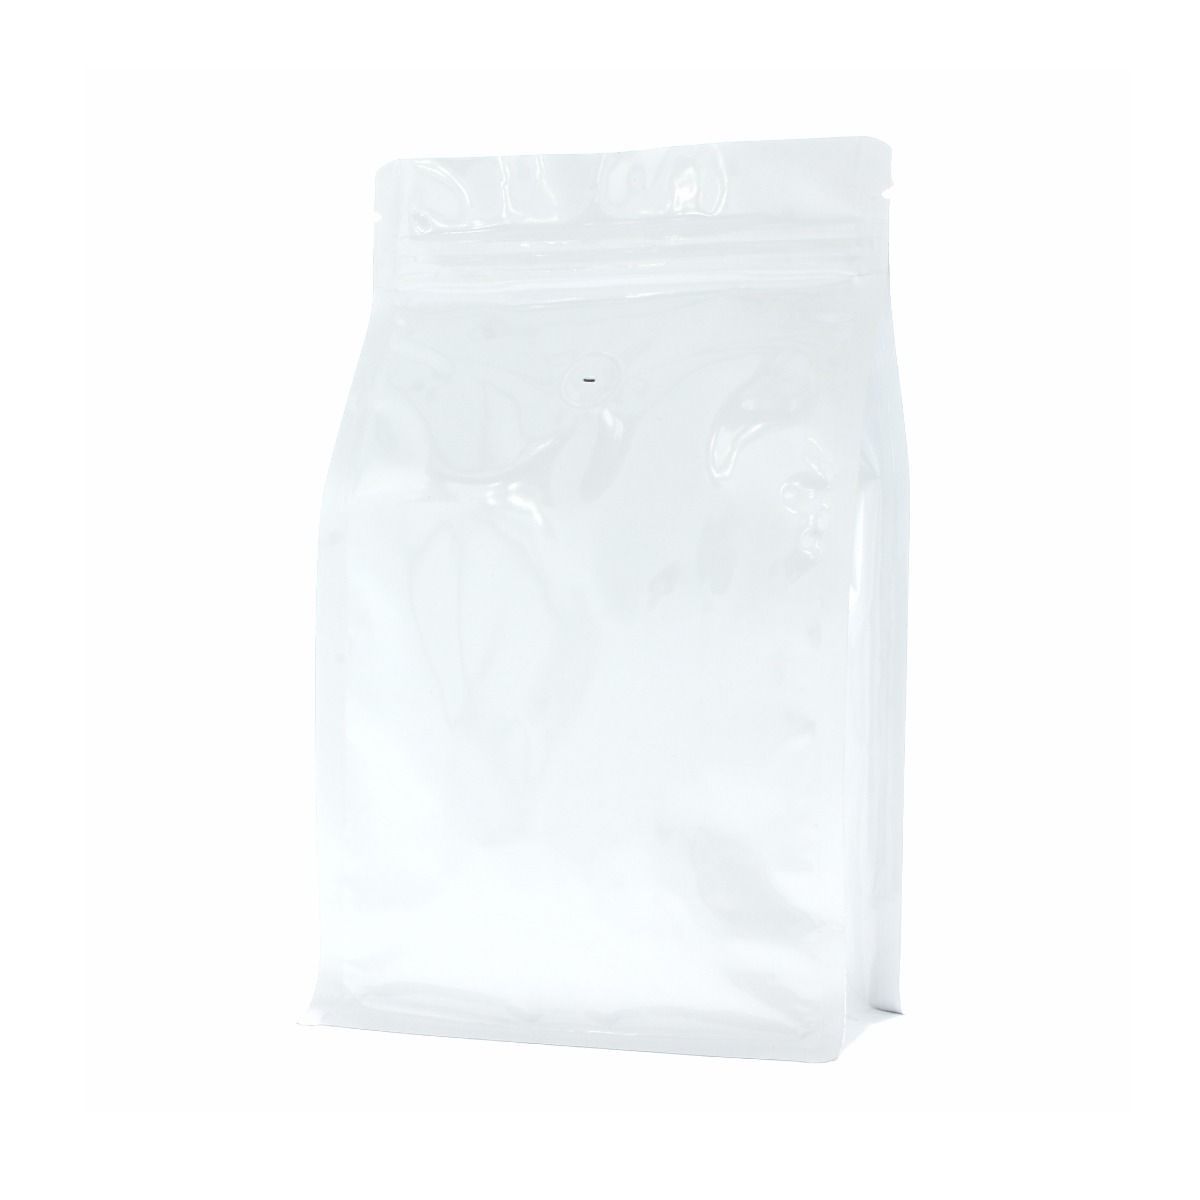 Flat bottom coffee pouch with zipper - shiny white